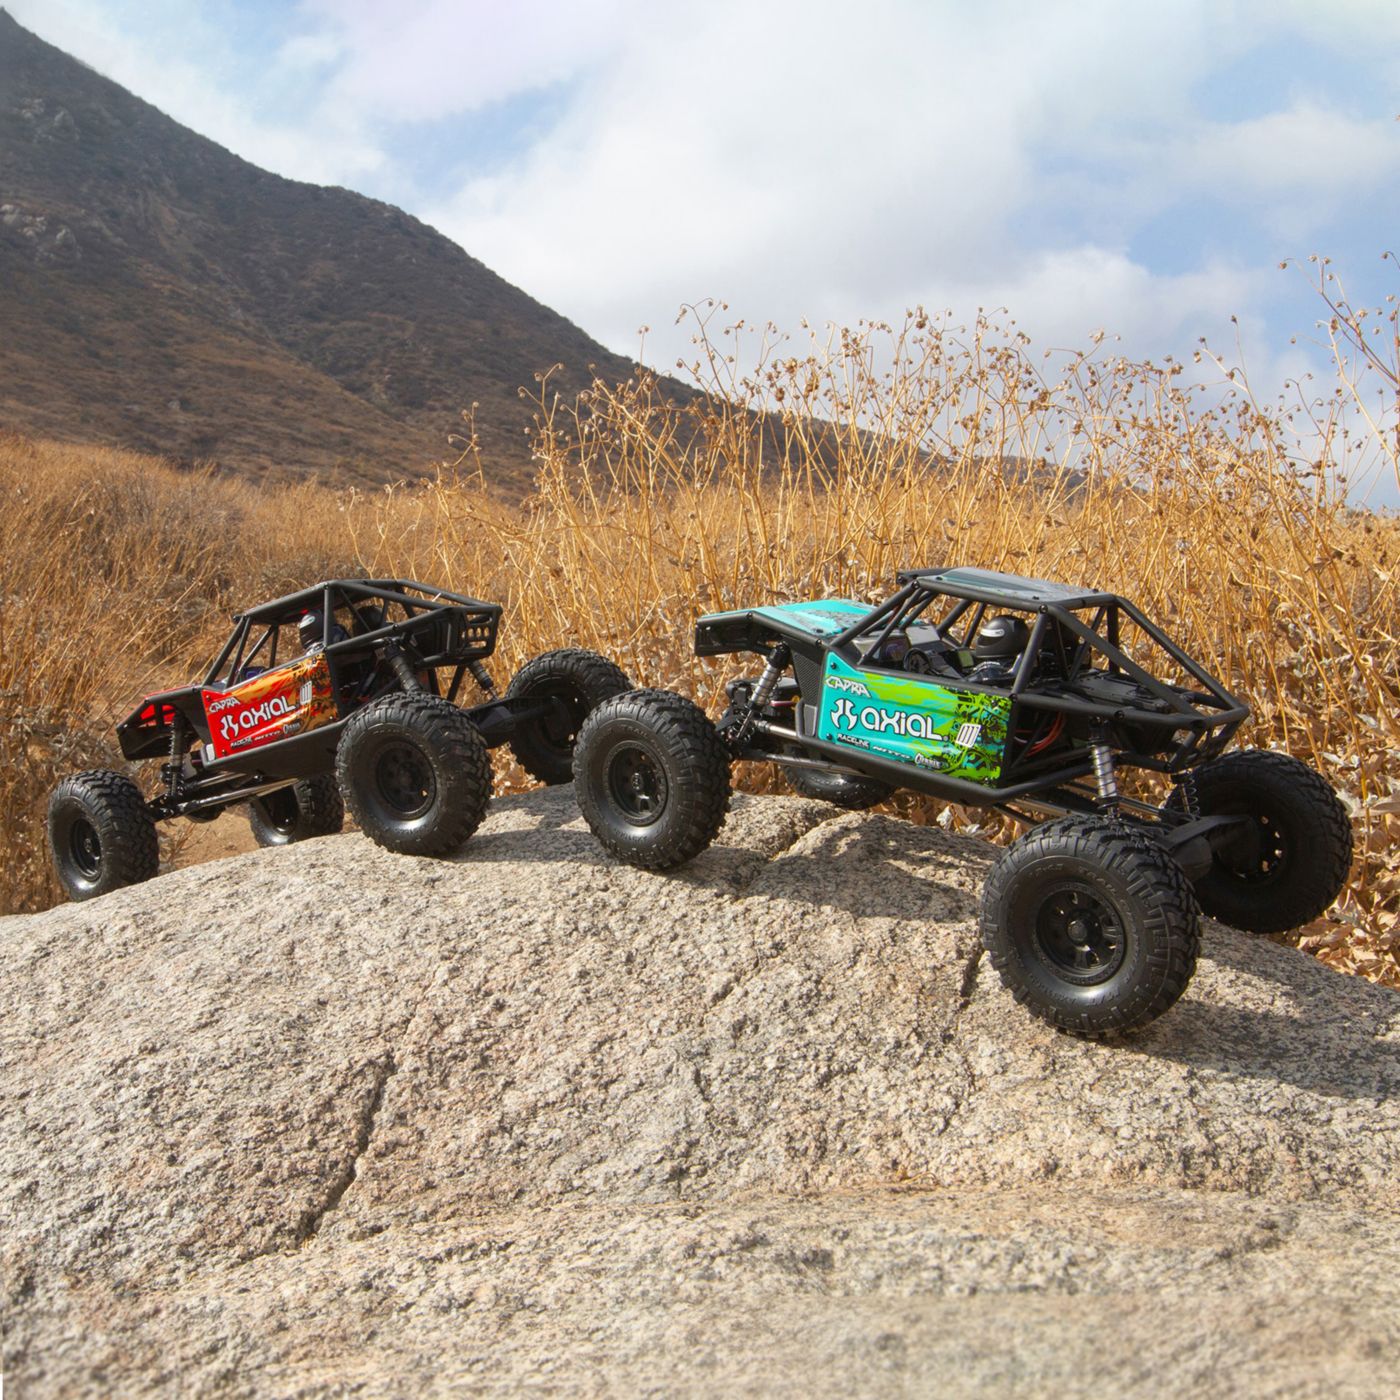 Capra 1.9 Unlimited Trail Buggy | Axial